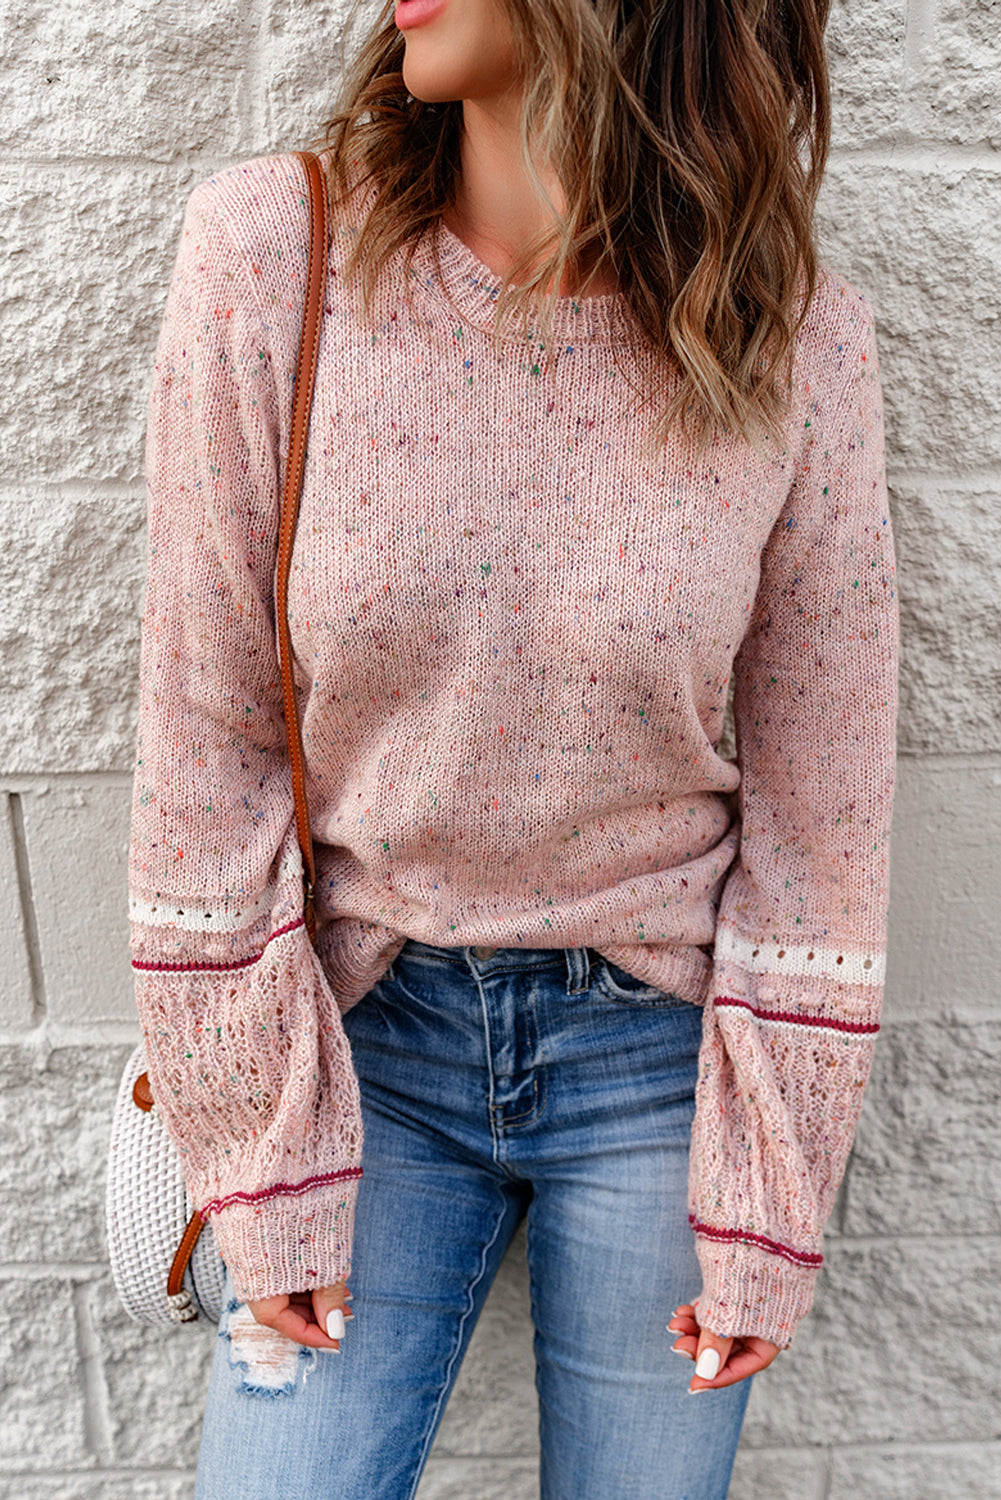 Pilling Patterned Sleeve Sweater